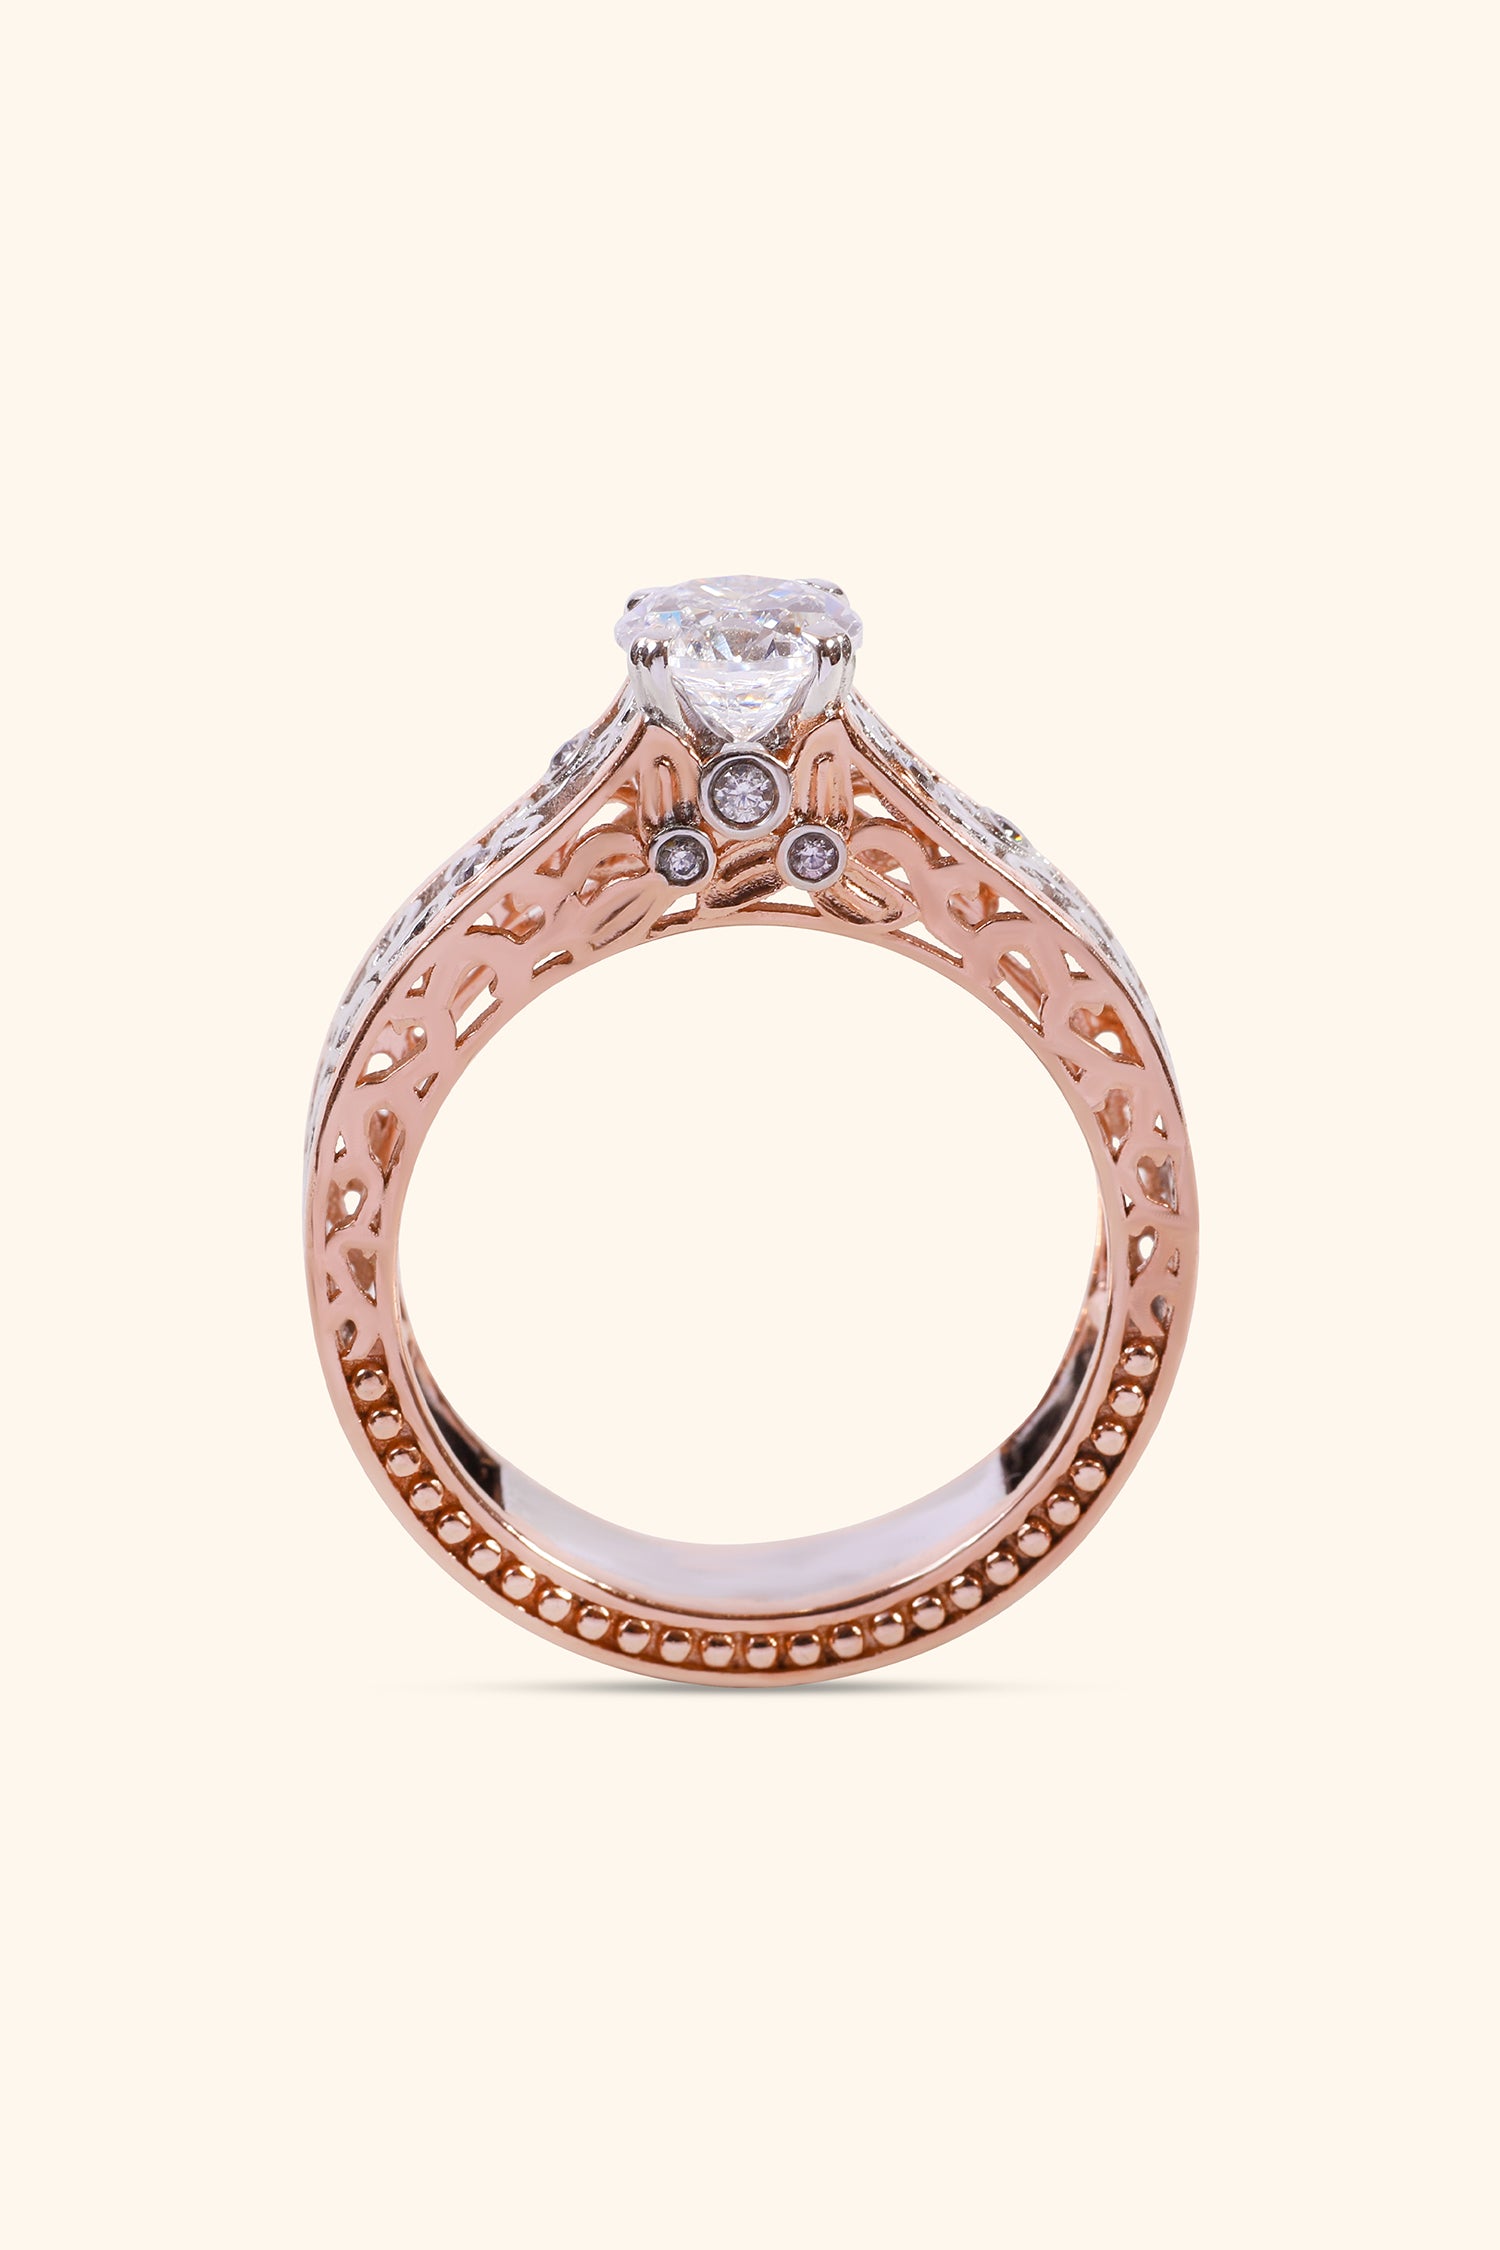 Isabella Vintage Ring with a Round Solitaire